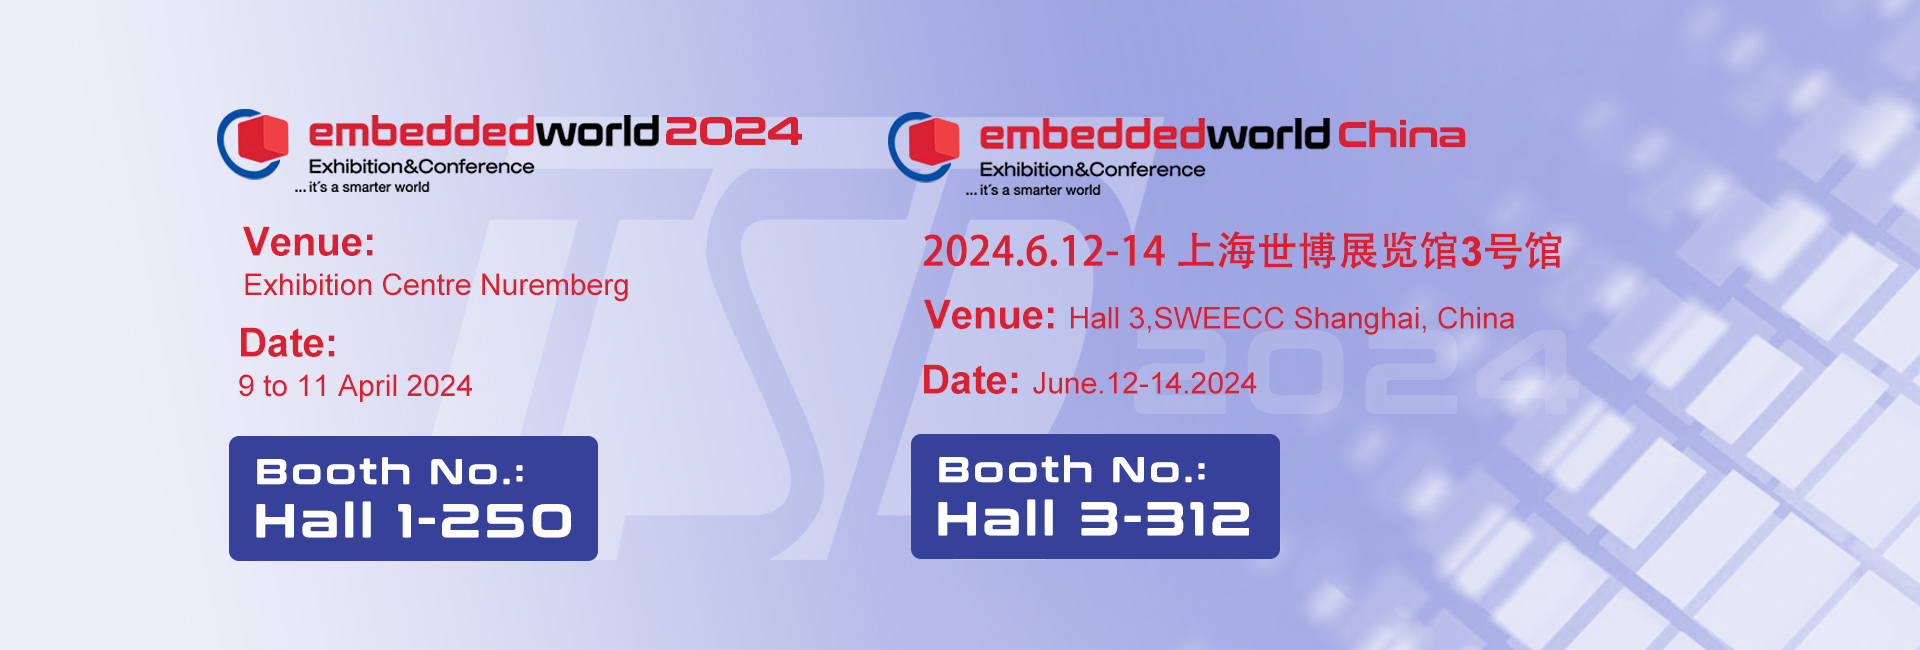 TSD will join the Embeddedworld Germany and Embeddedworld China in 2024